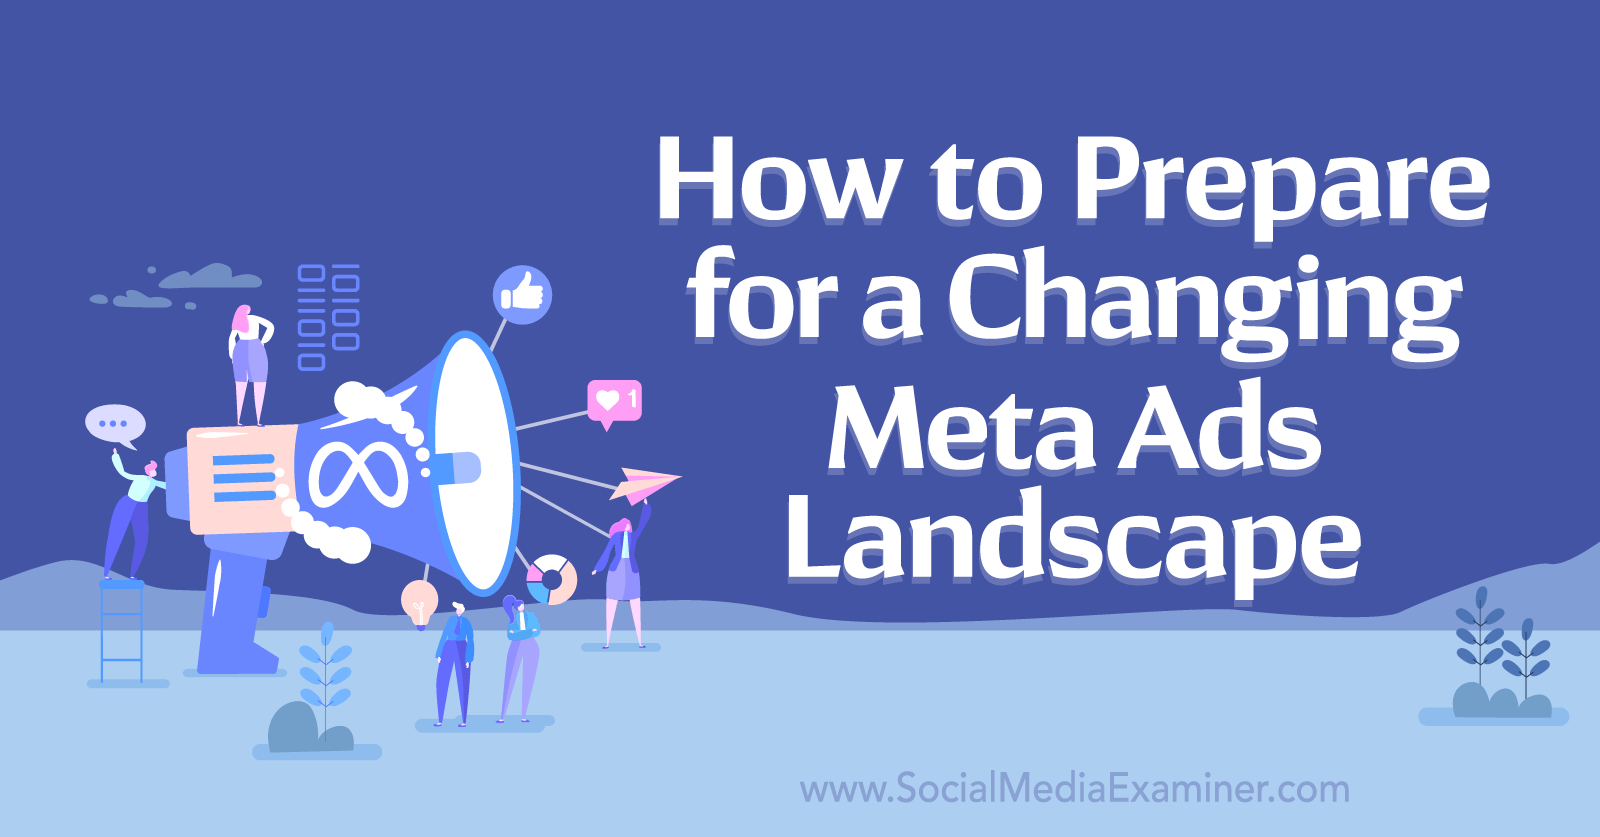 How to Prepare for a Changing Meta Ads Landscape by Social Media Examiner